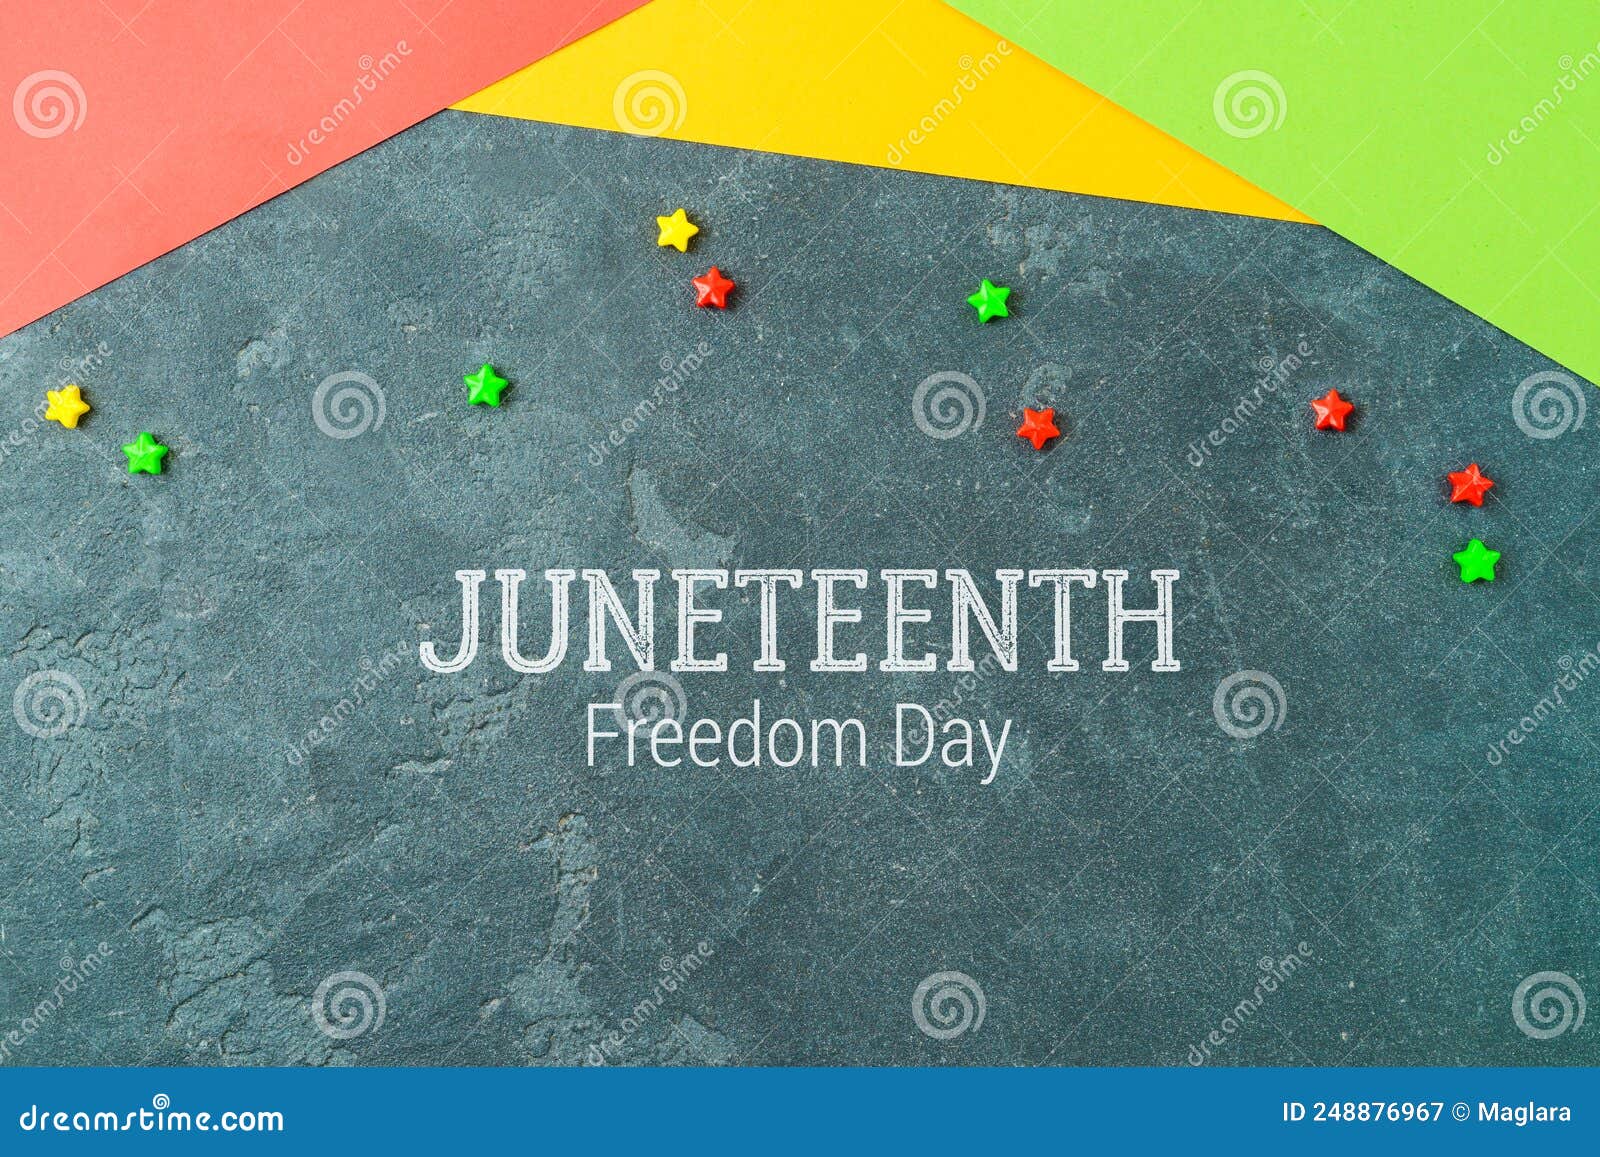 background for juneteenth holiday day with colorful paper